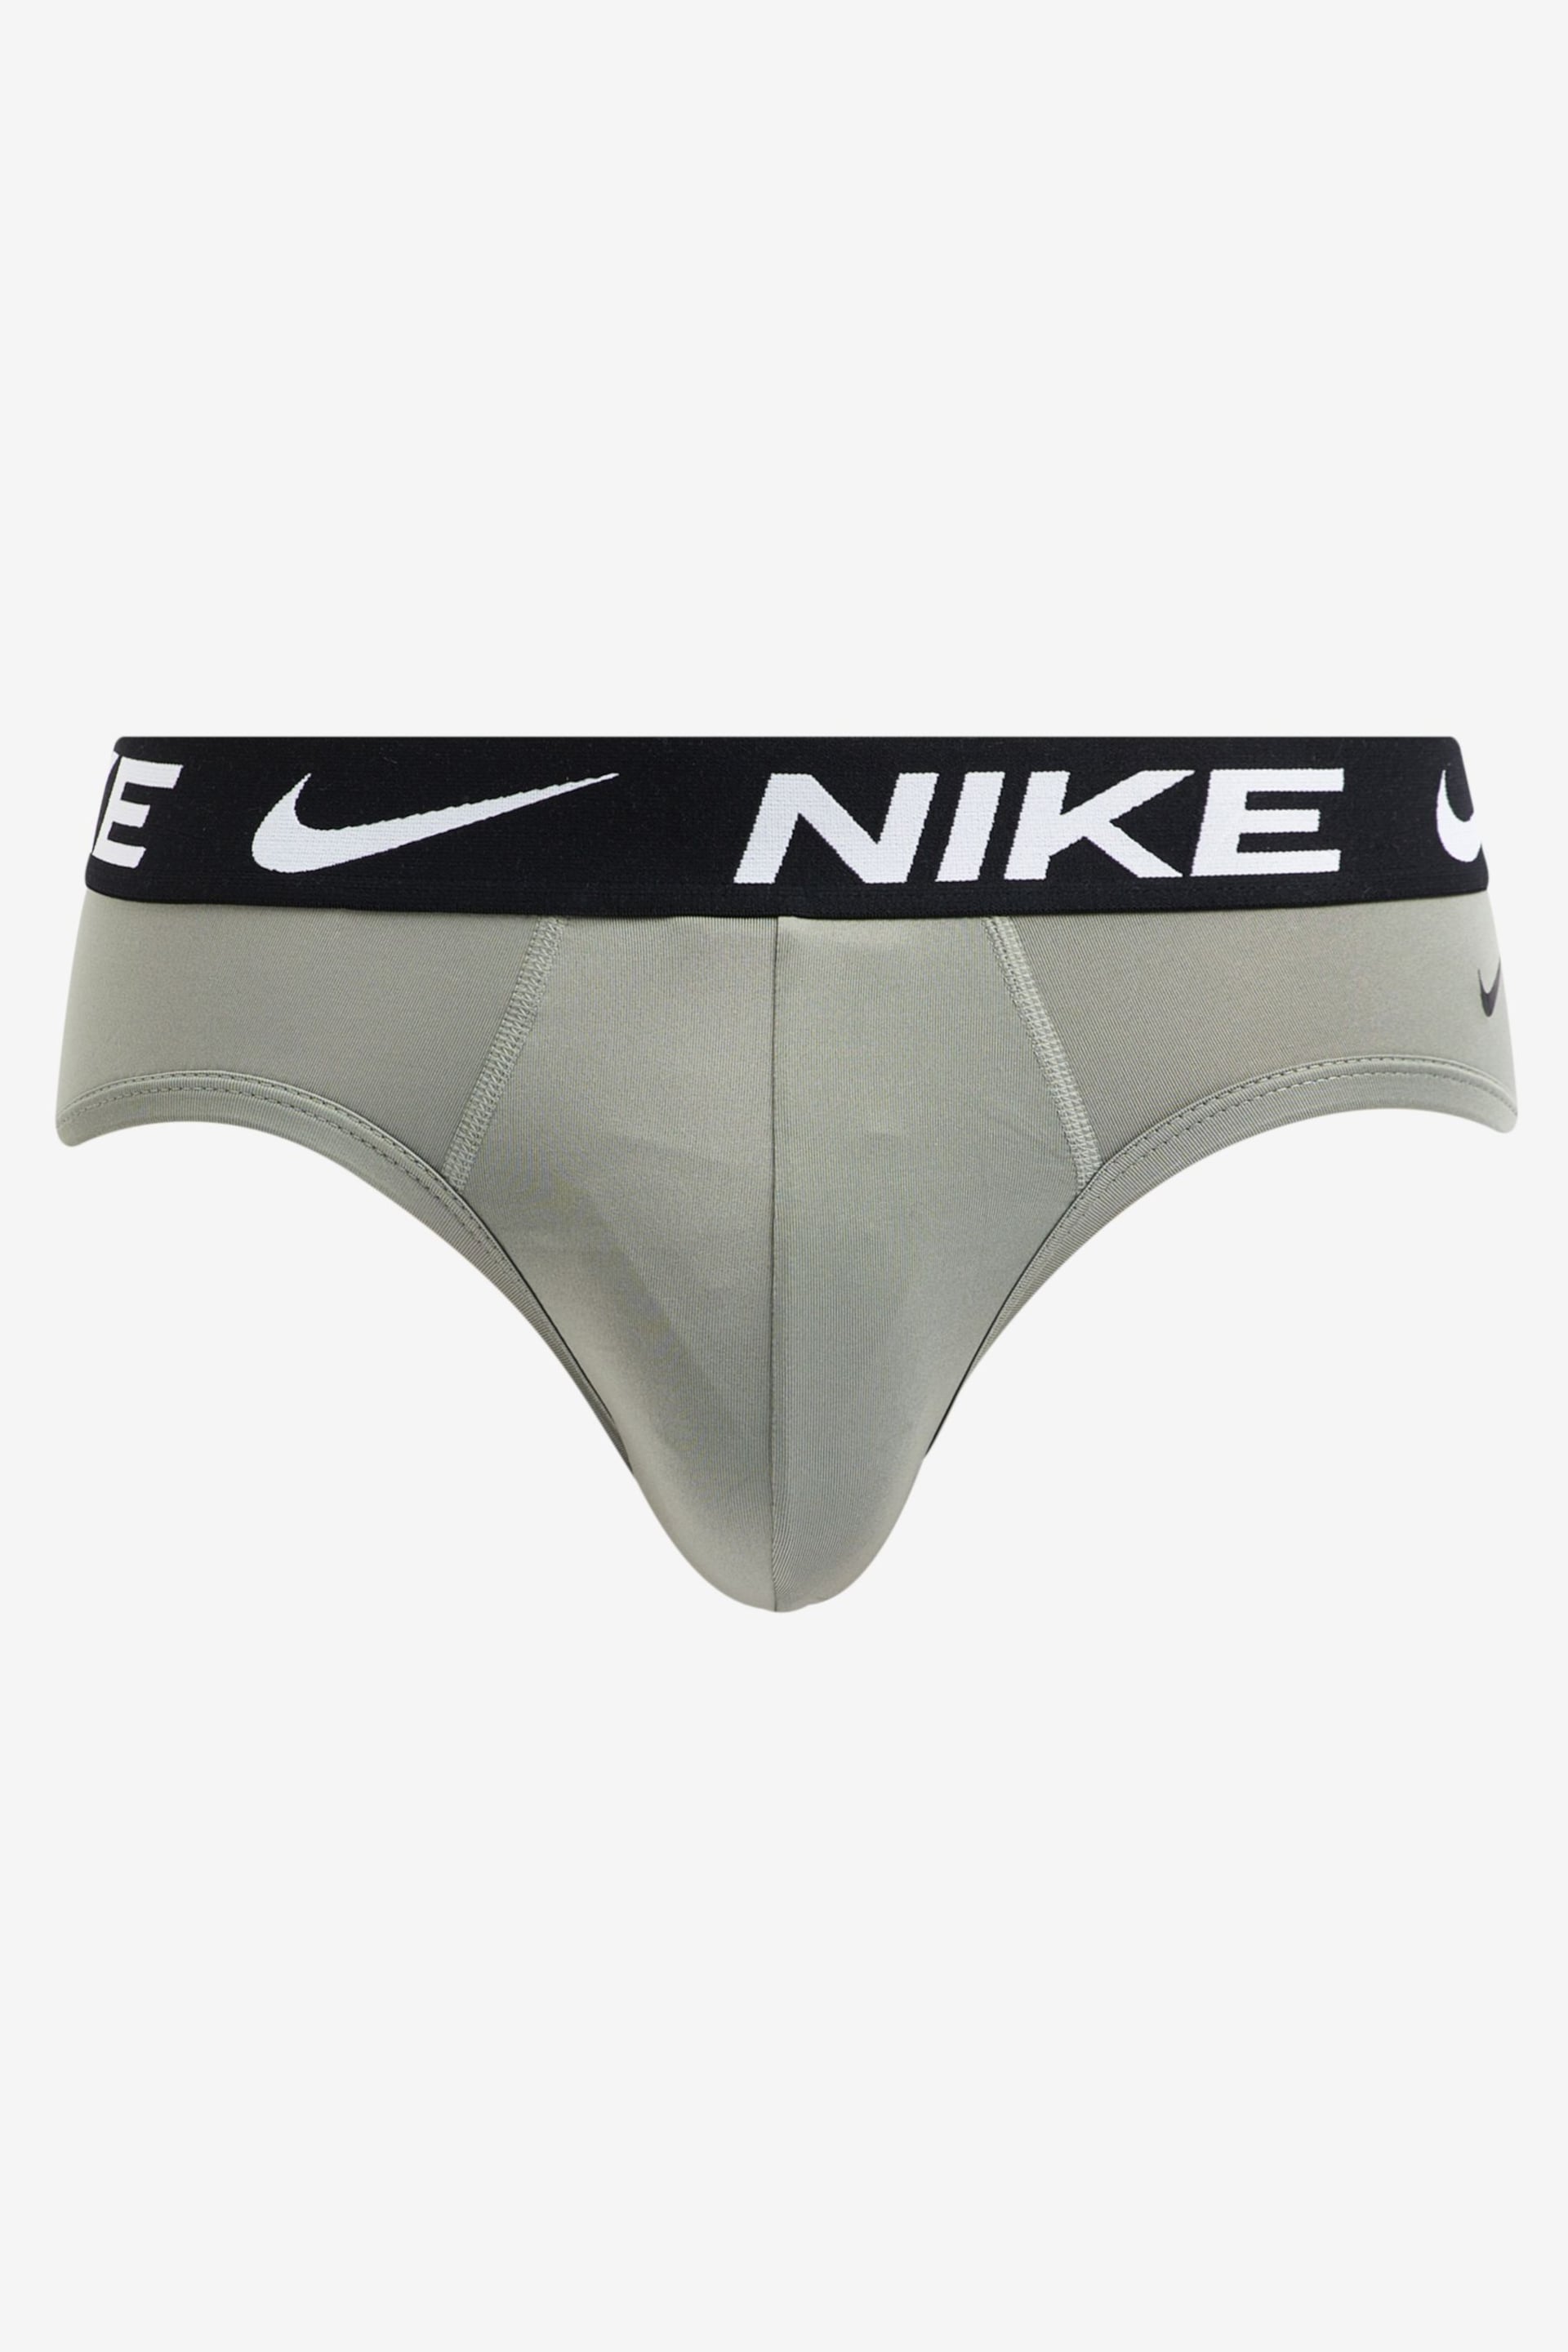 Nike Blue Hip Briefs 3 Pack - Image 3 of 4